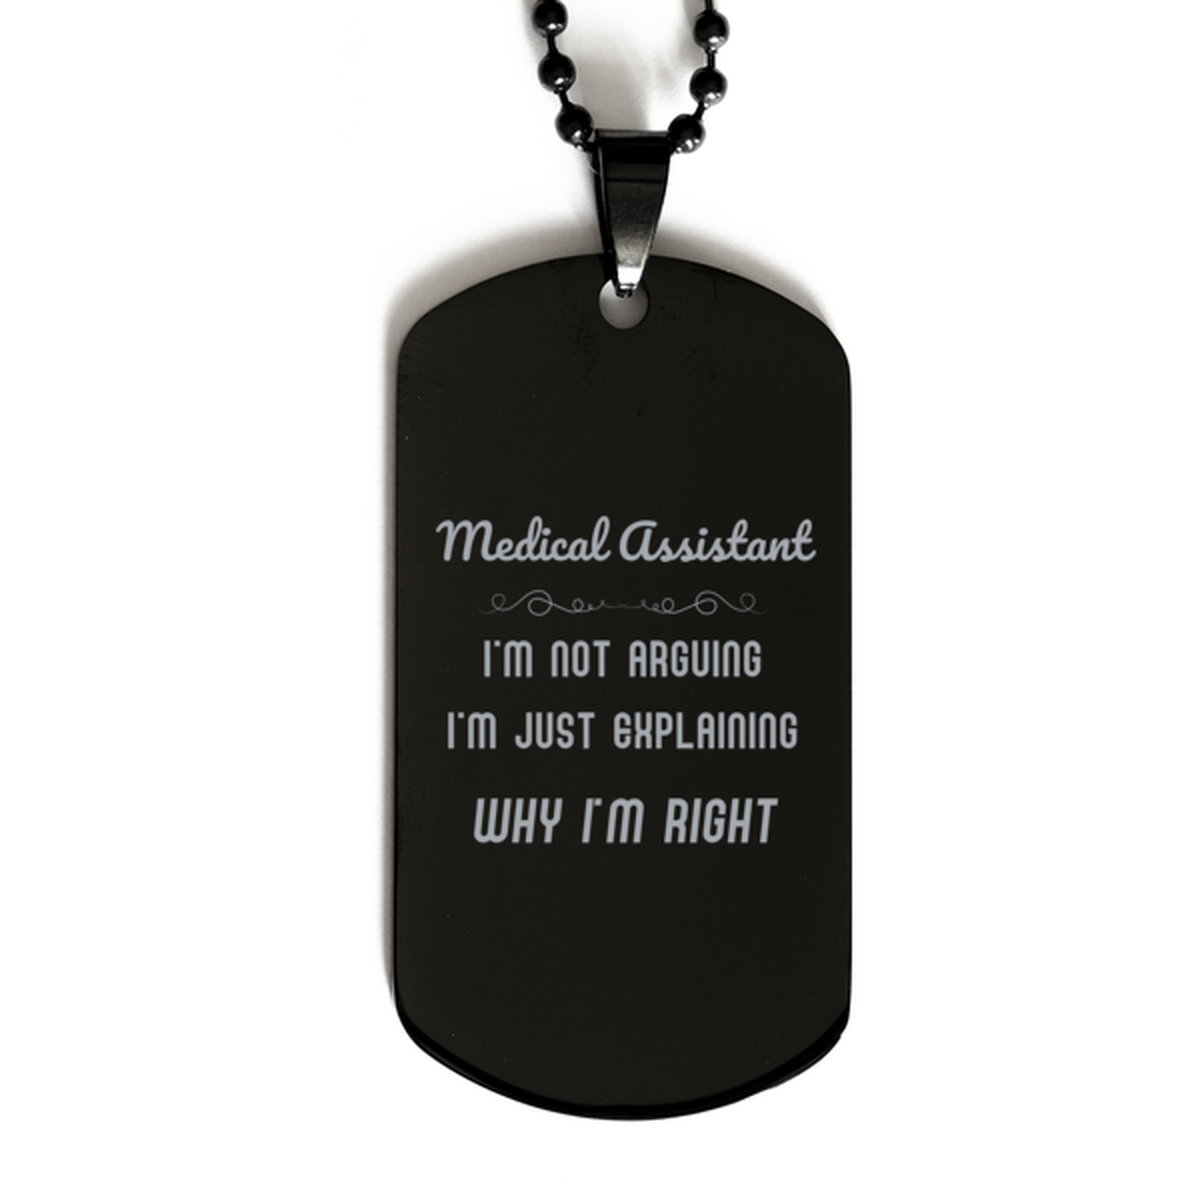 Medical Assistant I'm not Arguing. I'm Just Explaining Why I'm RIGHT Black Dog Tag, Funny Saying Quote Medical Assistant Gifts For Medical Assistant Graduation Birthday Christmas Gifts for Men Women Coworker